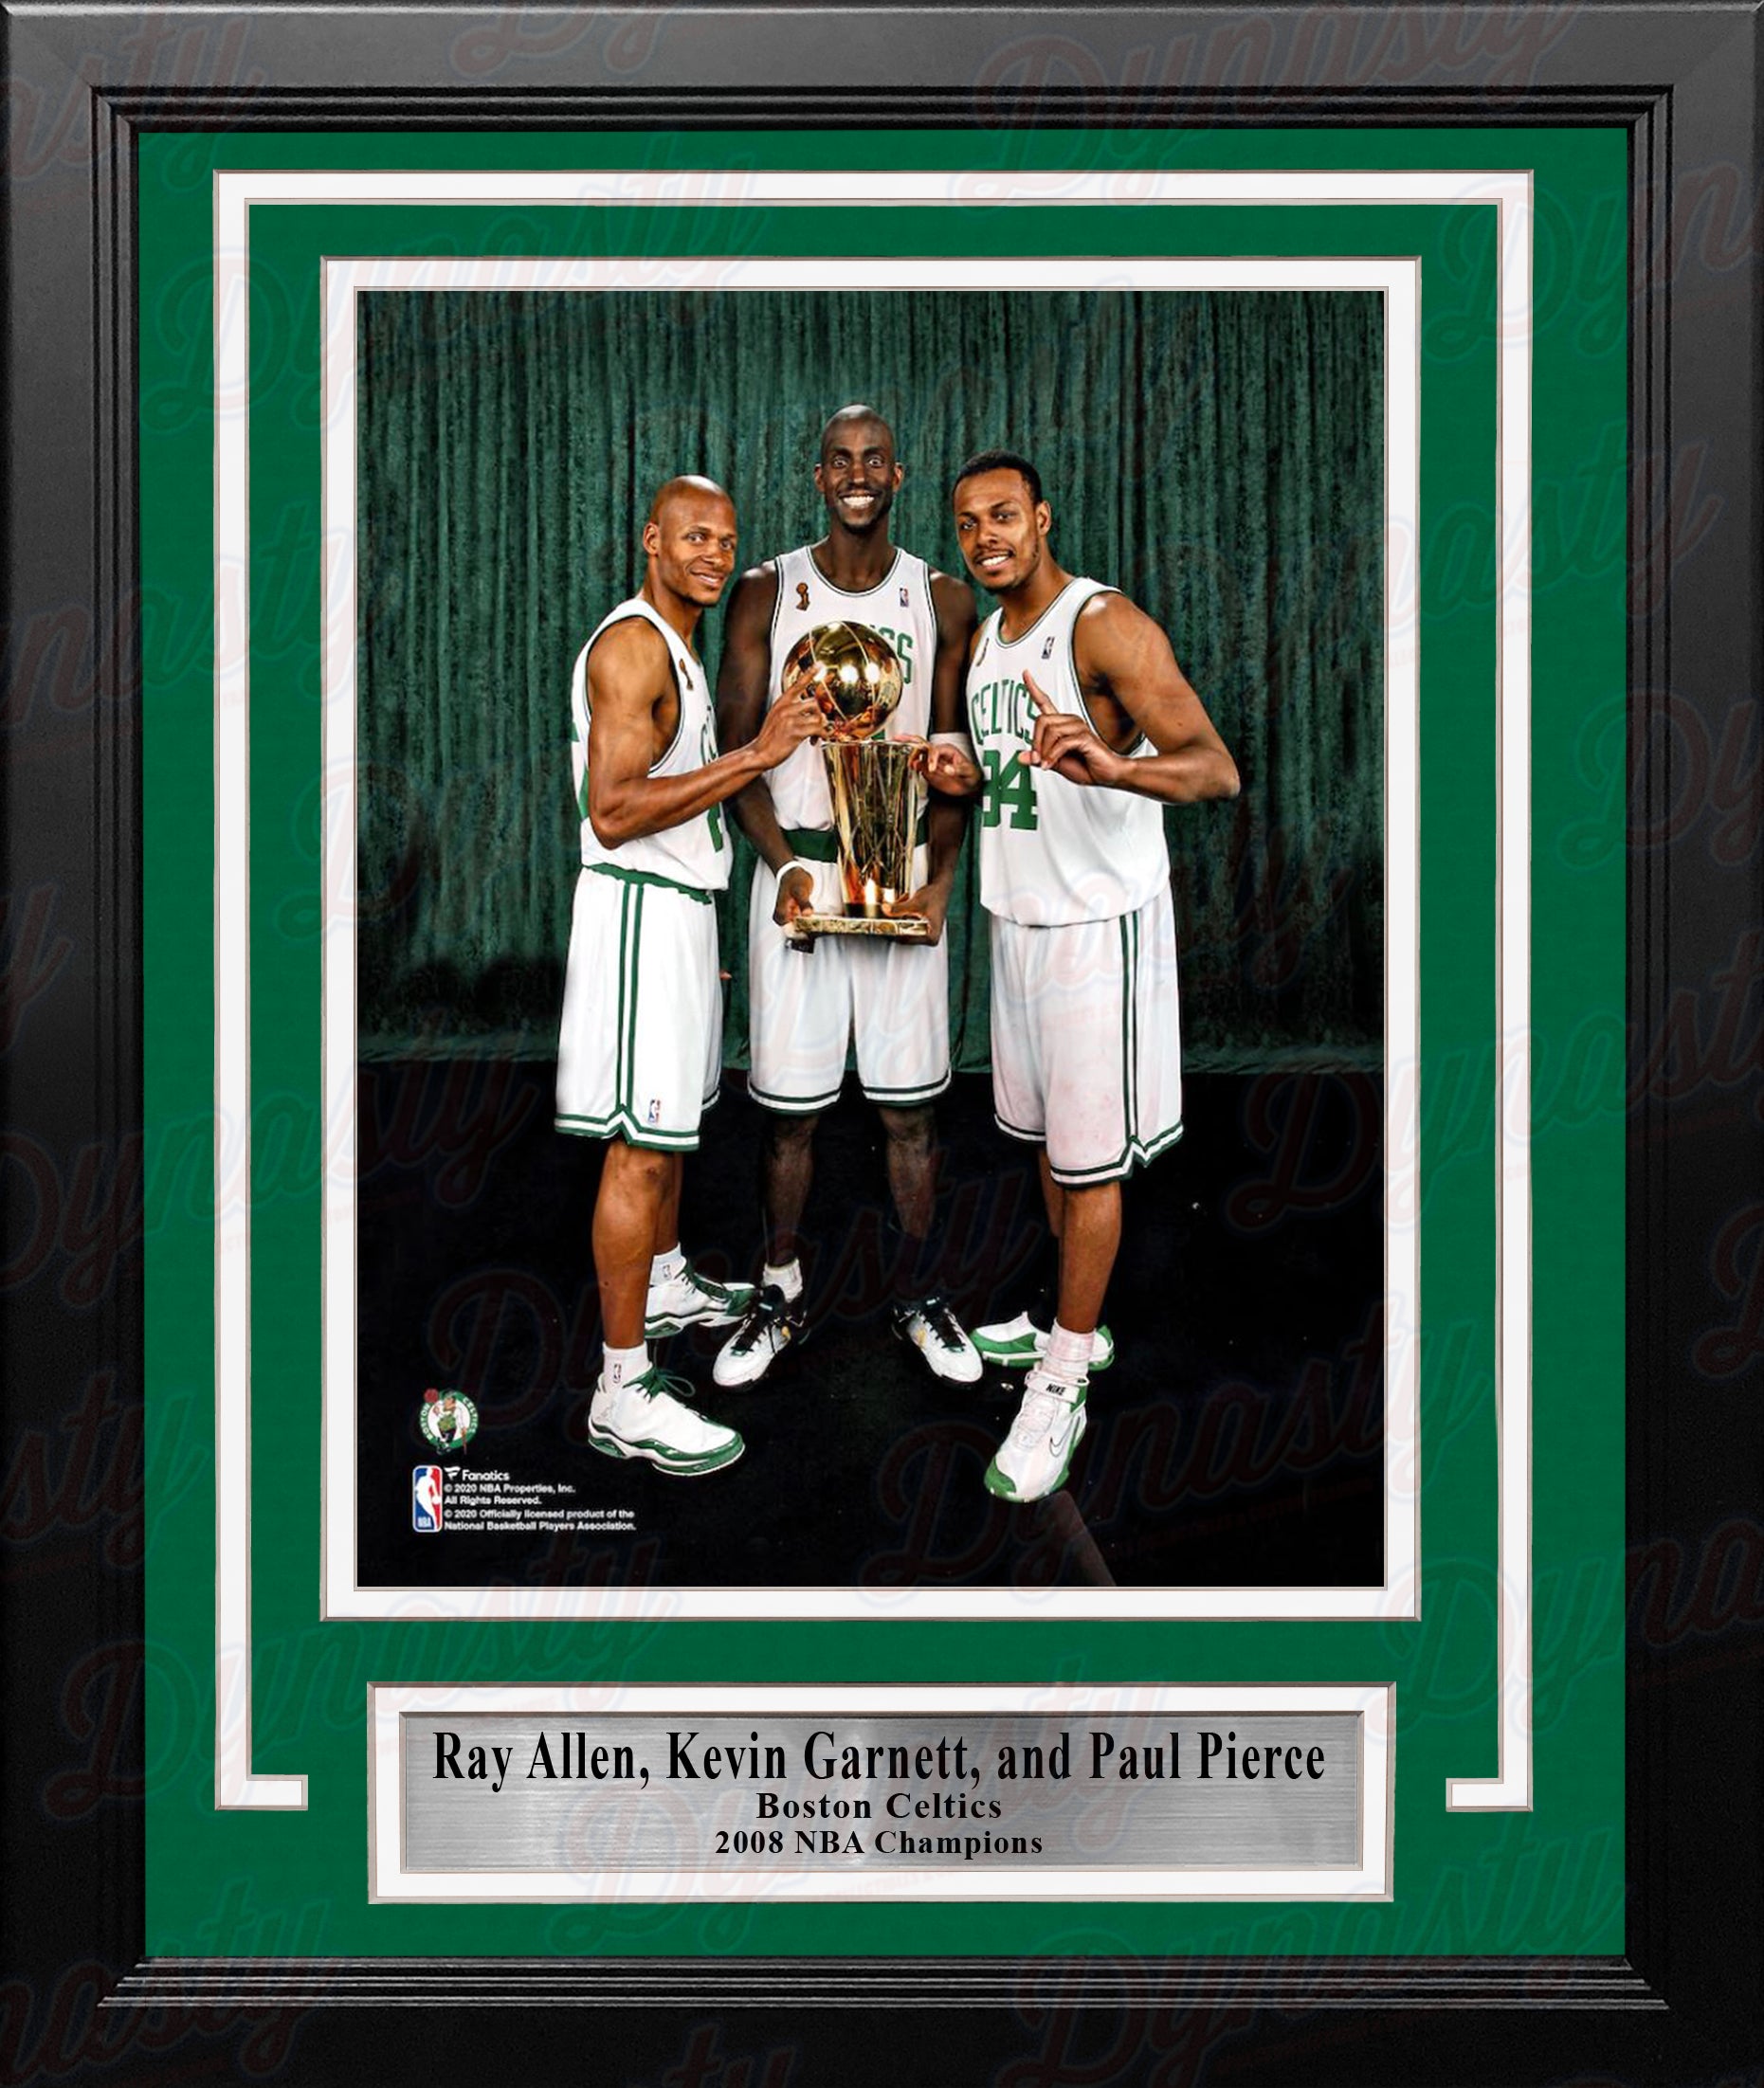 Paul Pierce poses in Instagram picture with Ray Allen, appeals to